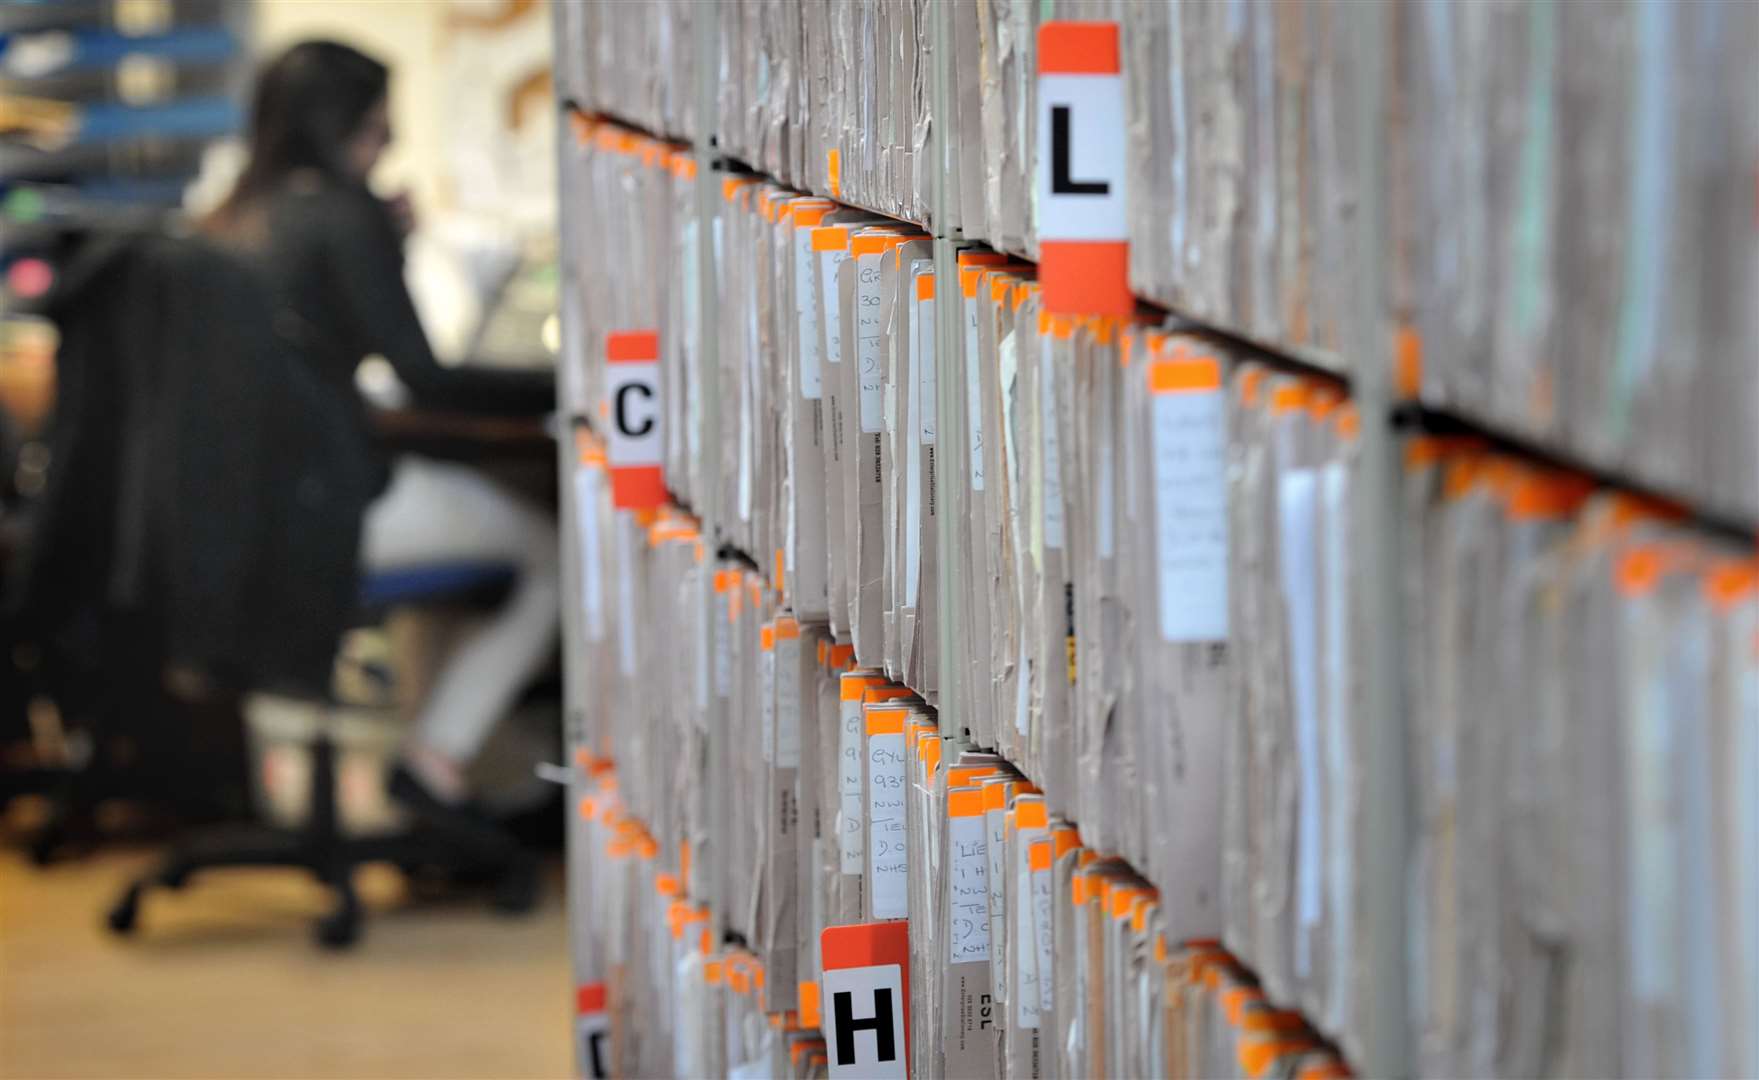 Patient’s records are stored at the Temple Fortune Health Centre GP Practice near Golders Green, London.